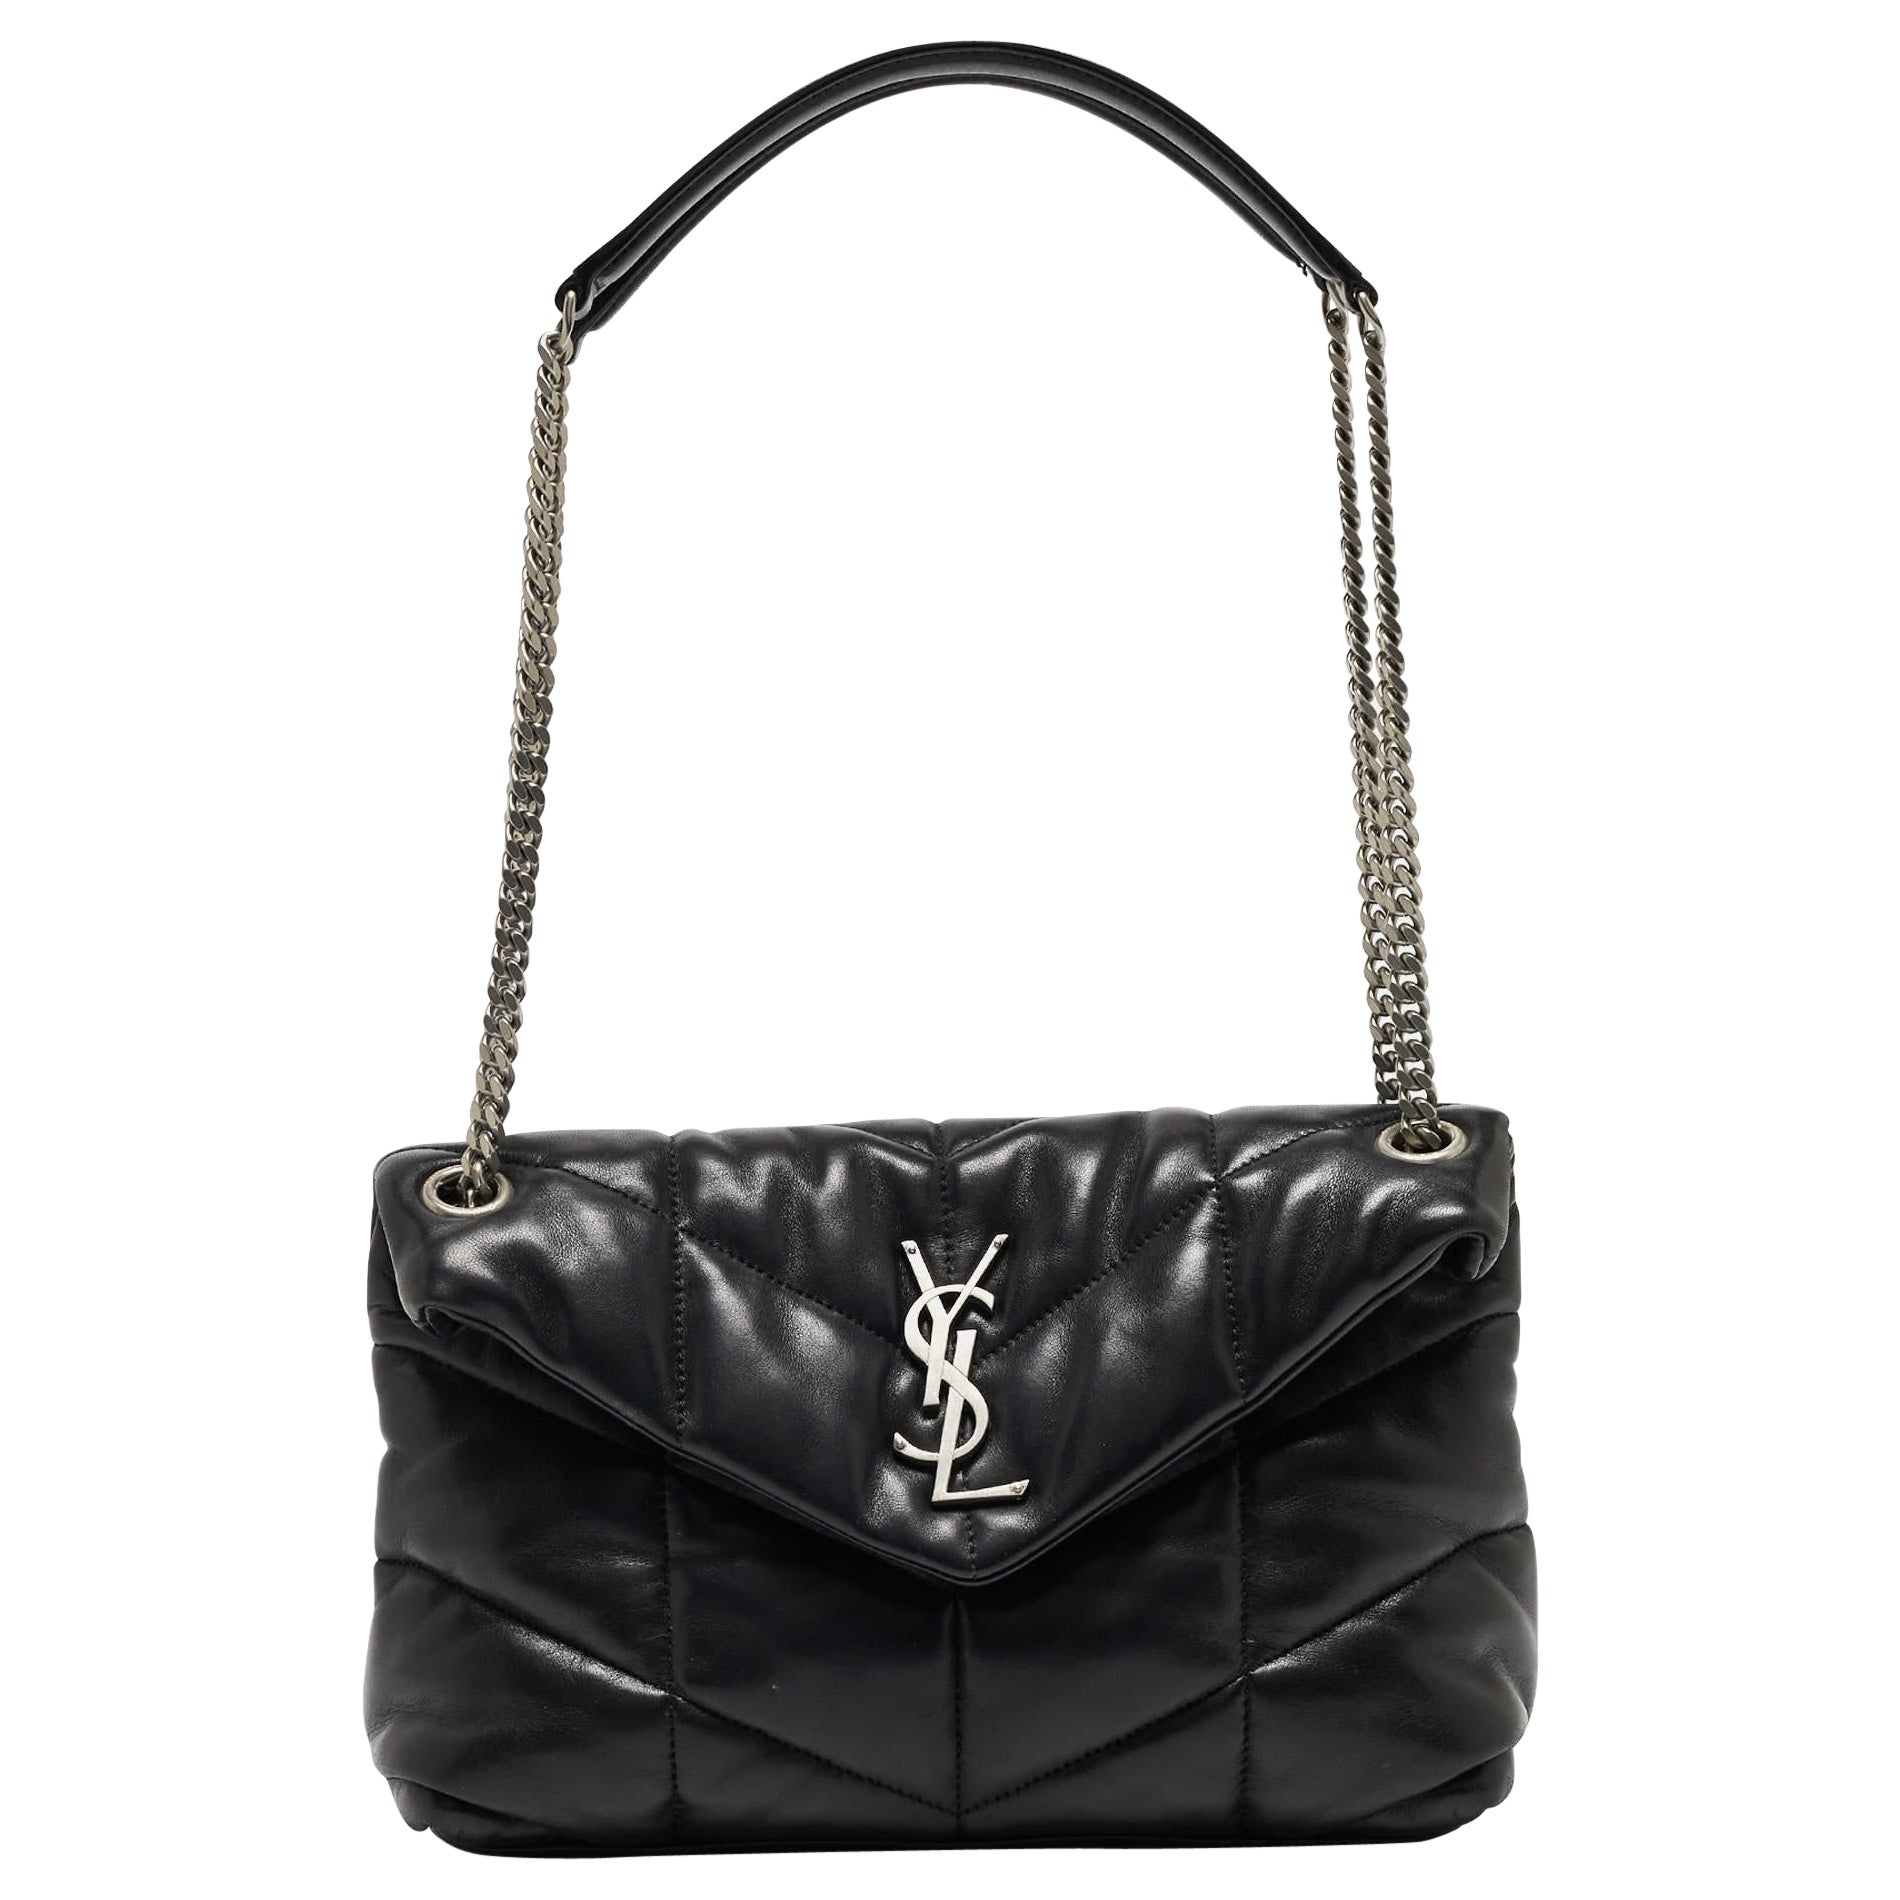 Saint Laurent Black Quilted Leather Small Loulou Puffer Shoulder Bag